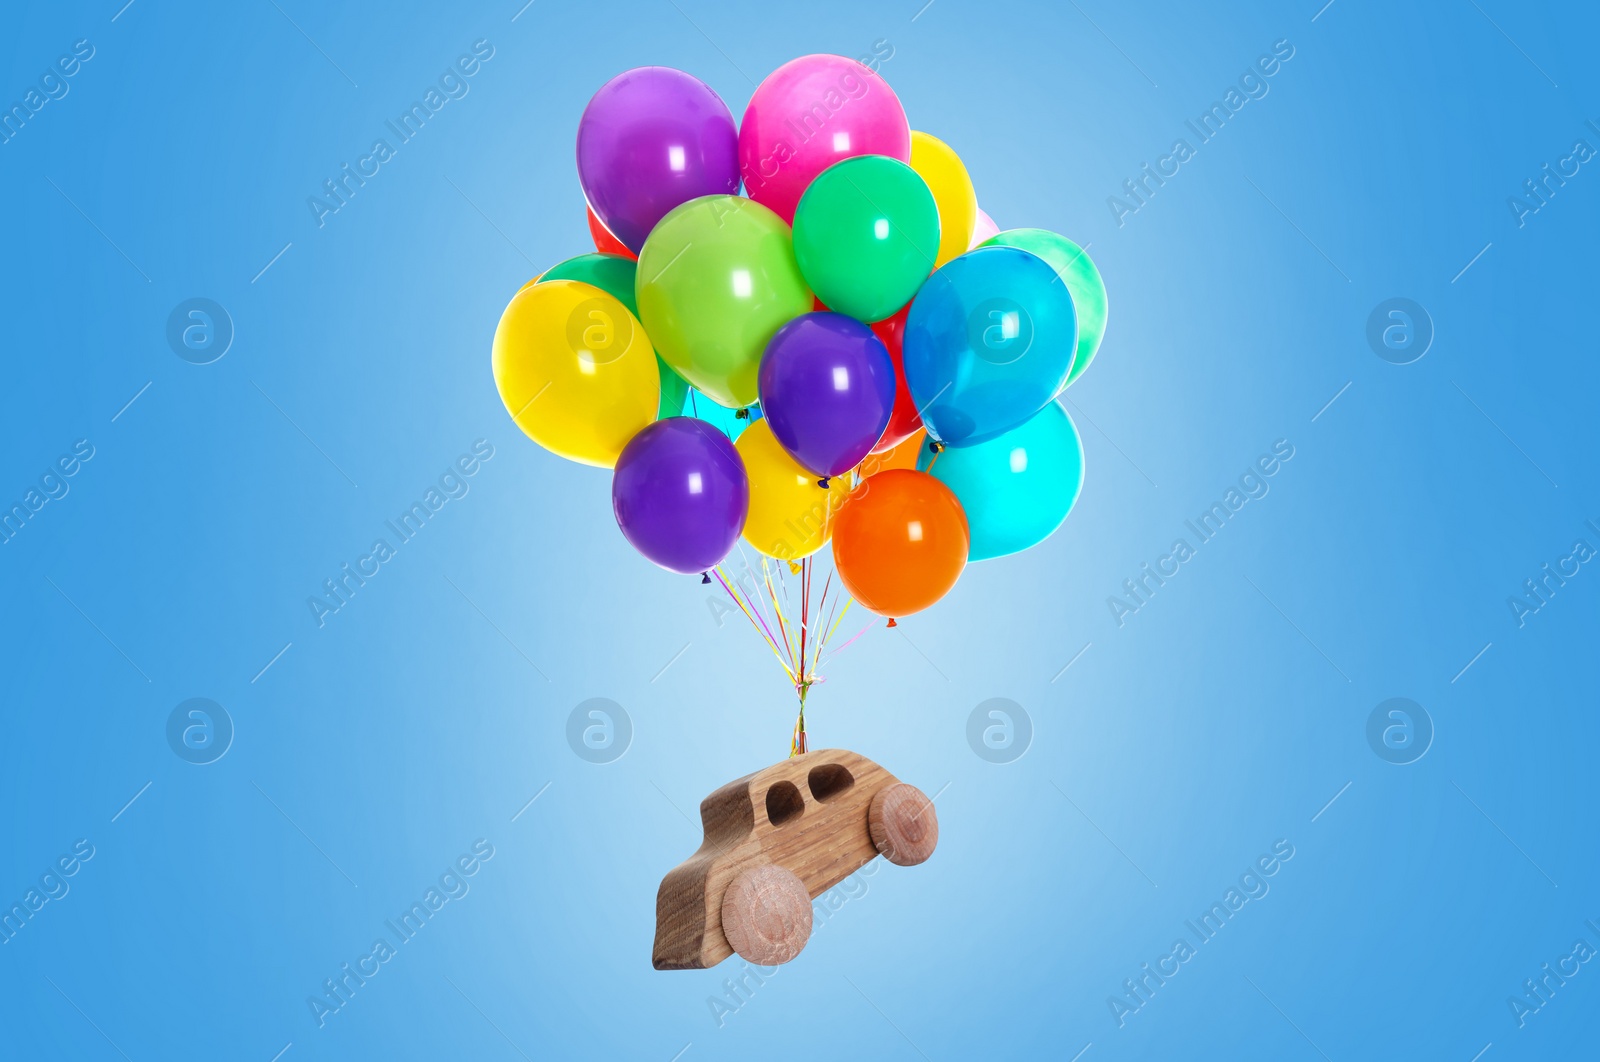 Image of Many balloons tied to wooden toy car flying on light blue background